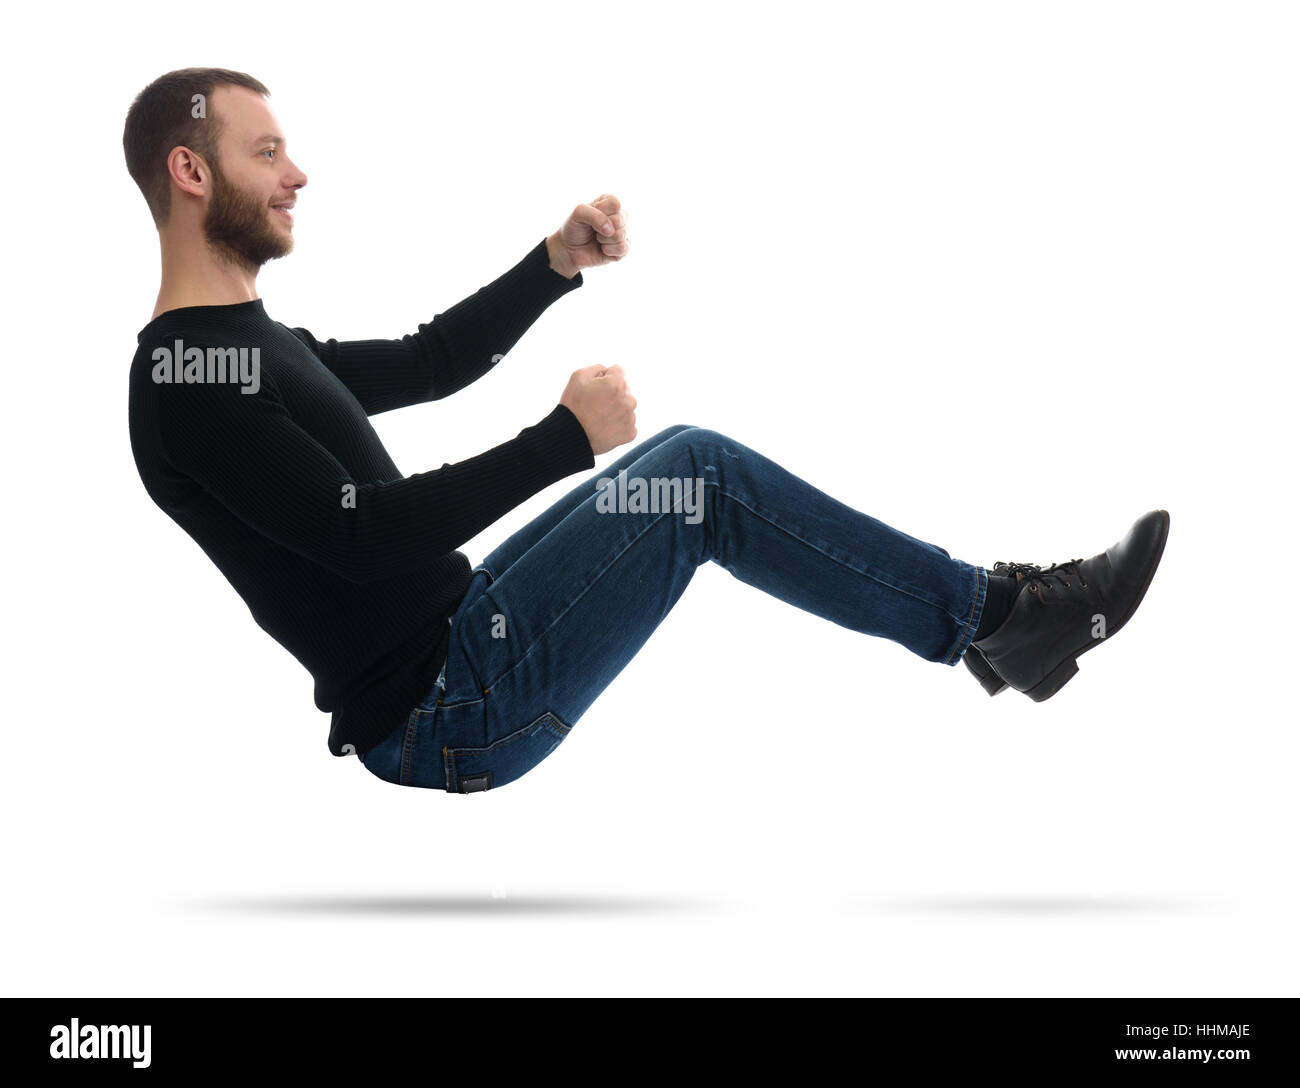 guy drives an imaginary car. man in the air. Isolated on white Stock Photo